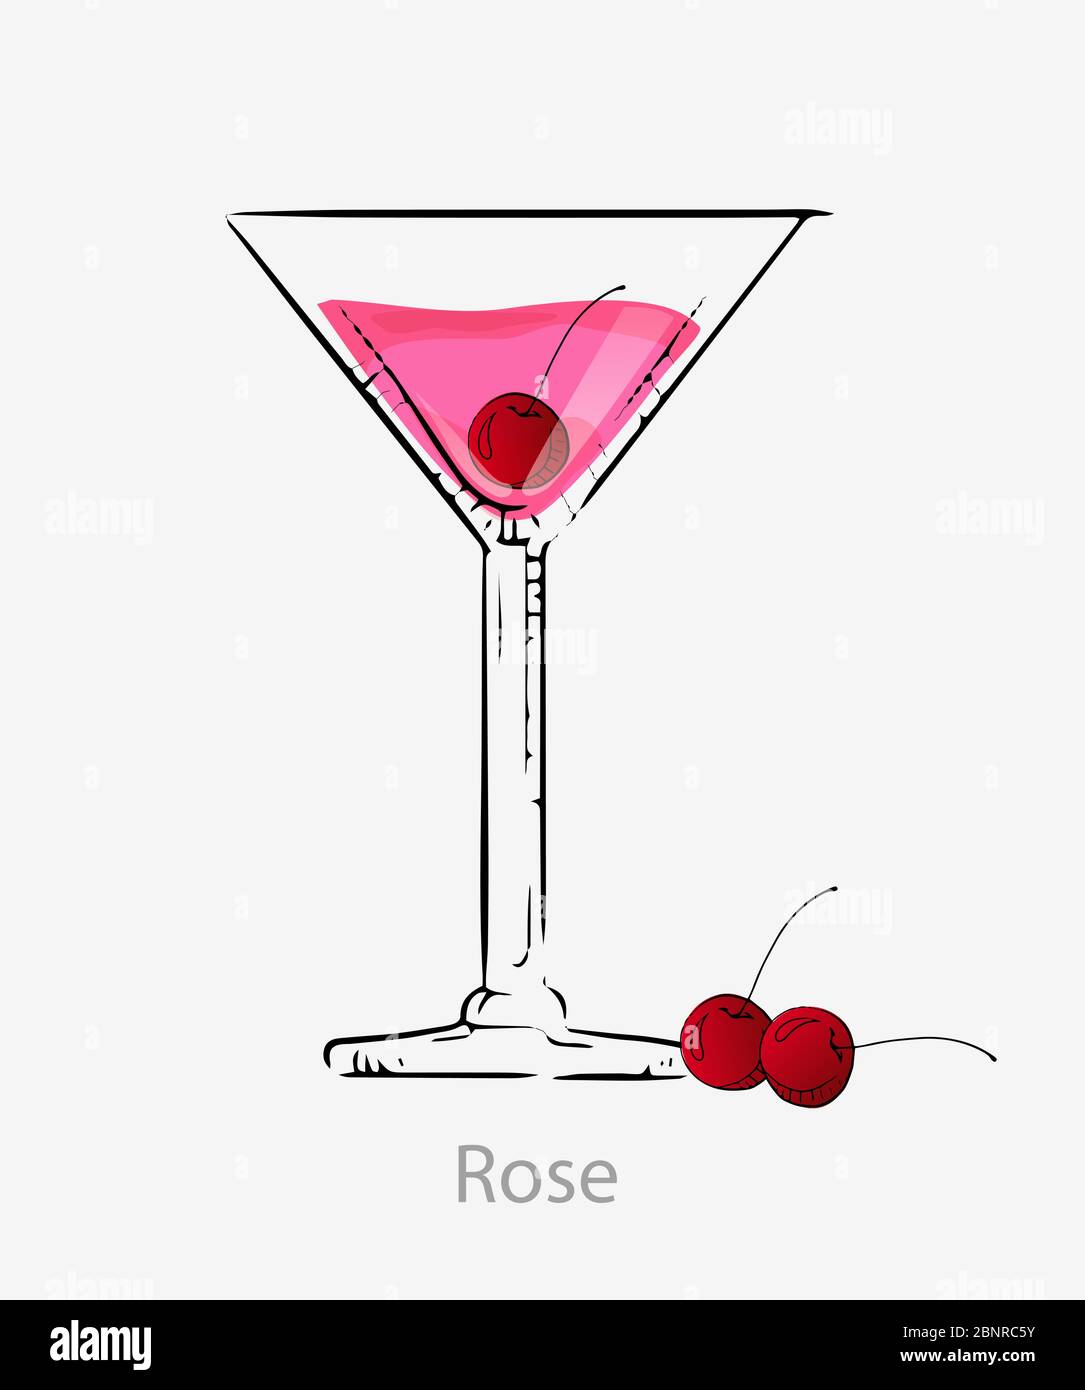 Cocktail rose. Red cocktail cherry long drink alcoholic dry vermouth cherry. Stock Vector